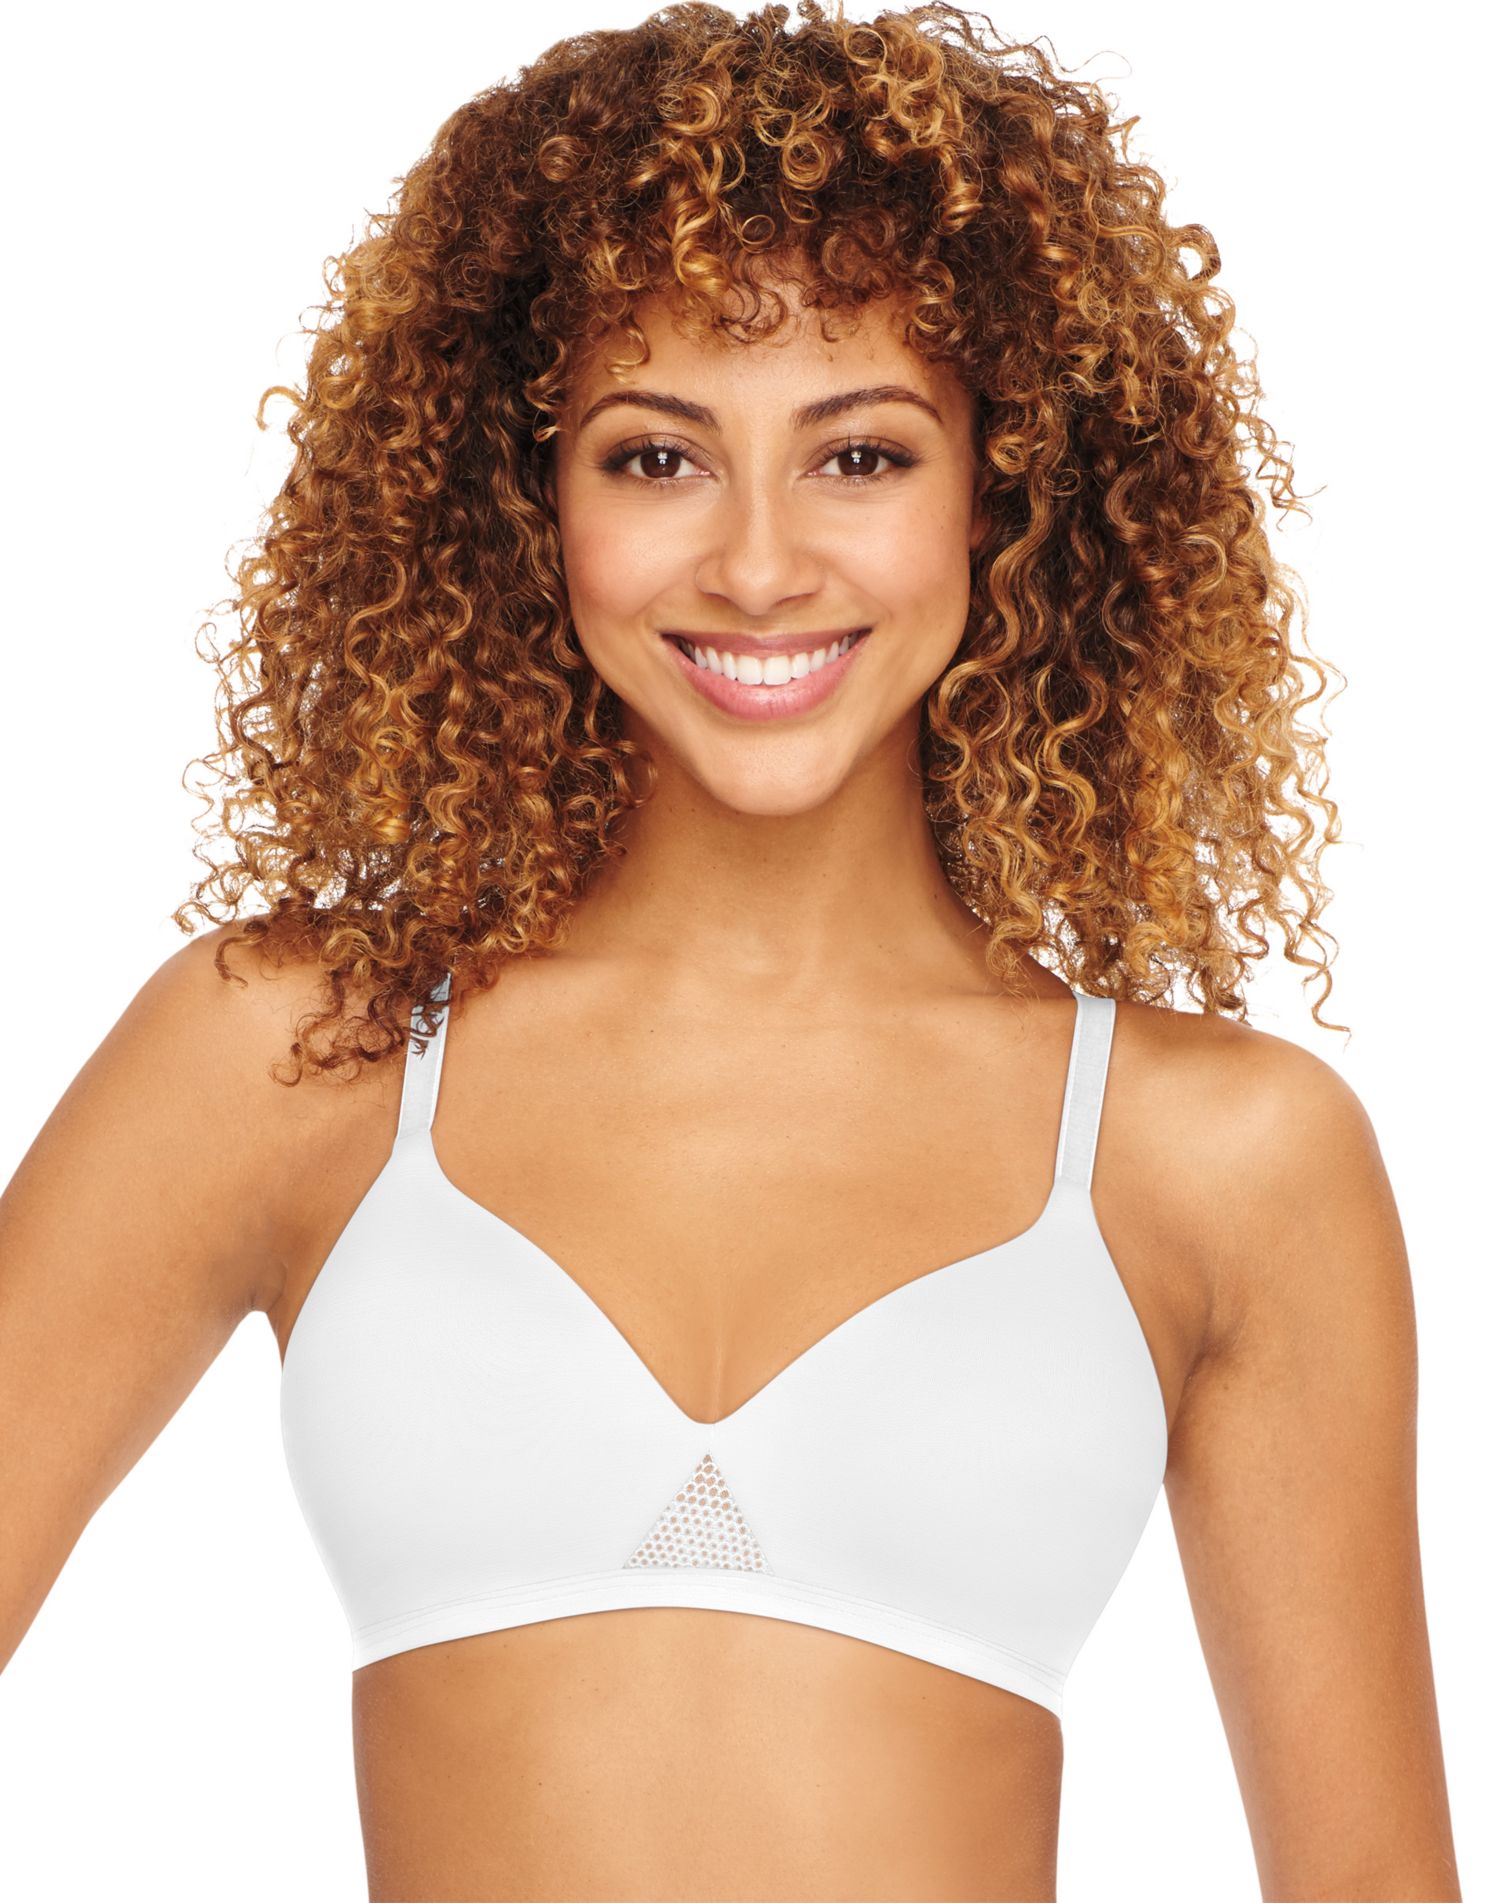 Hanes Women's Invisible Embrace Pullover Bralette, Moisture Wicking